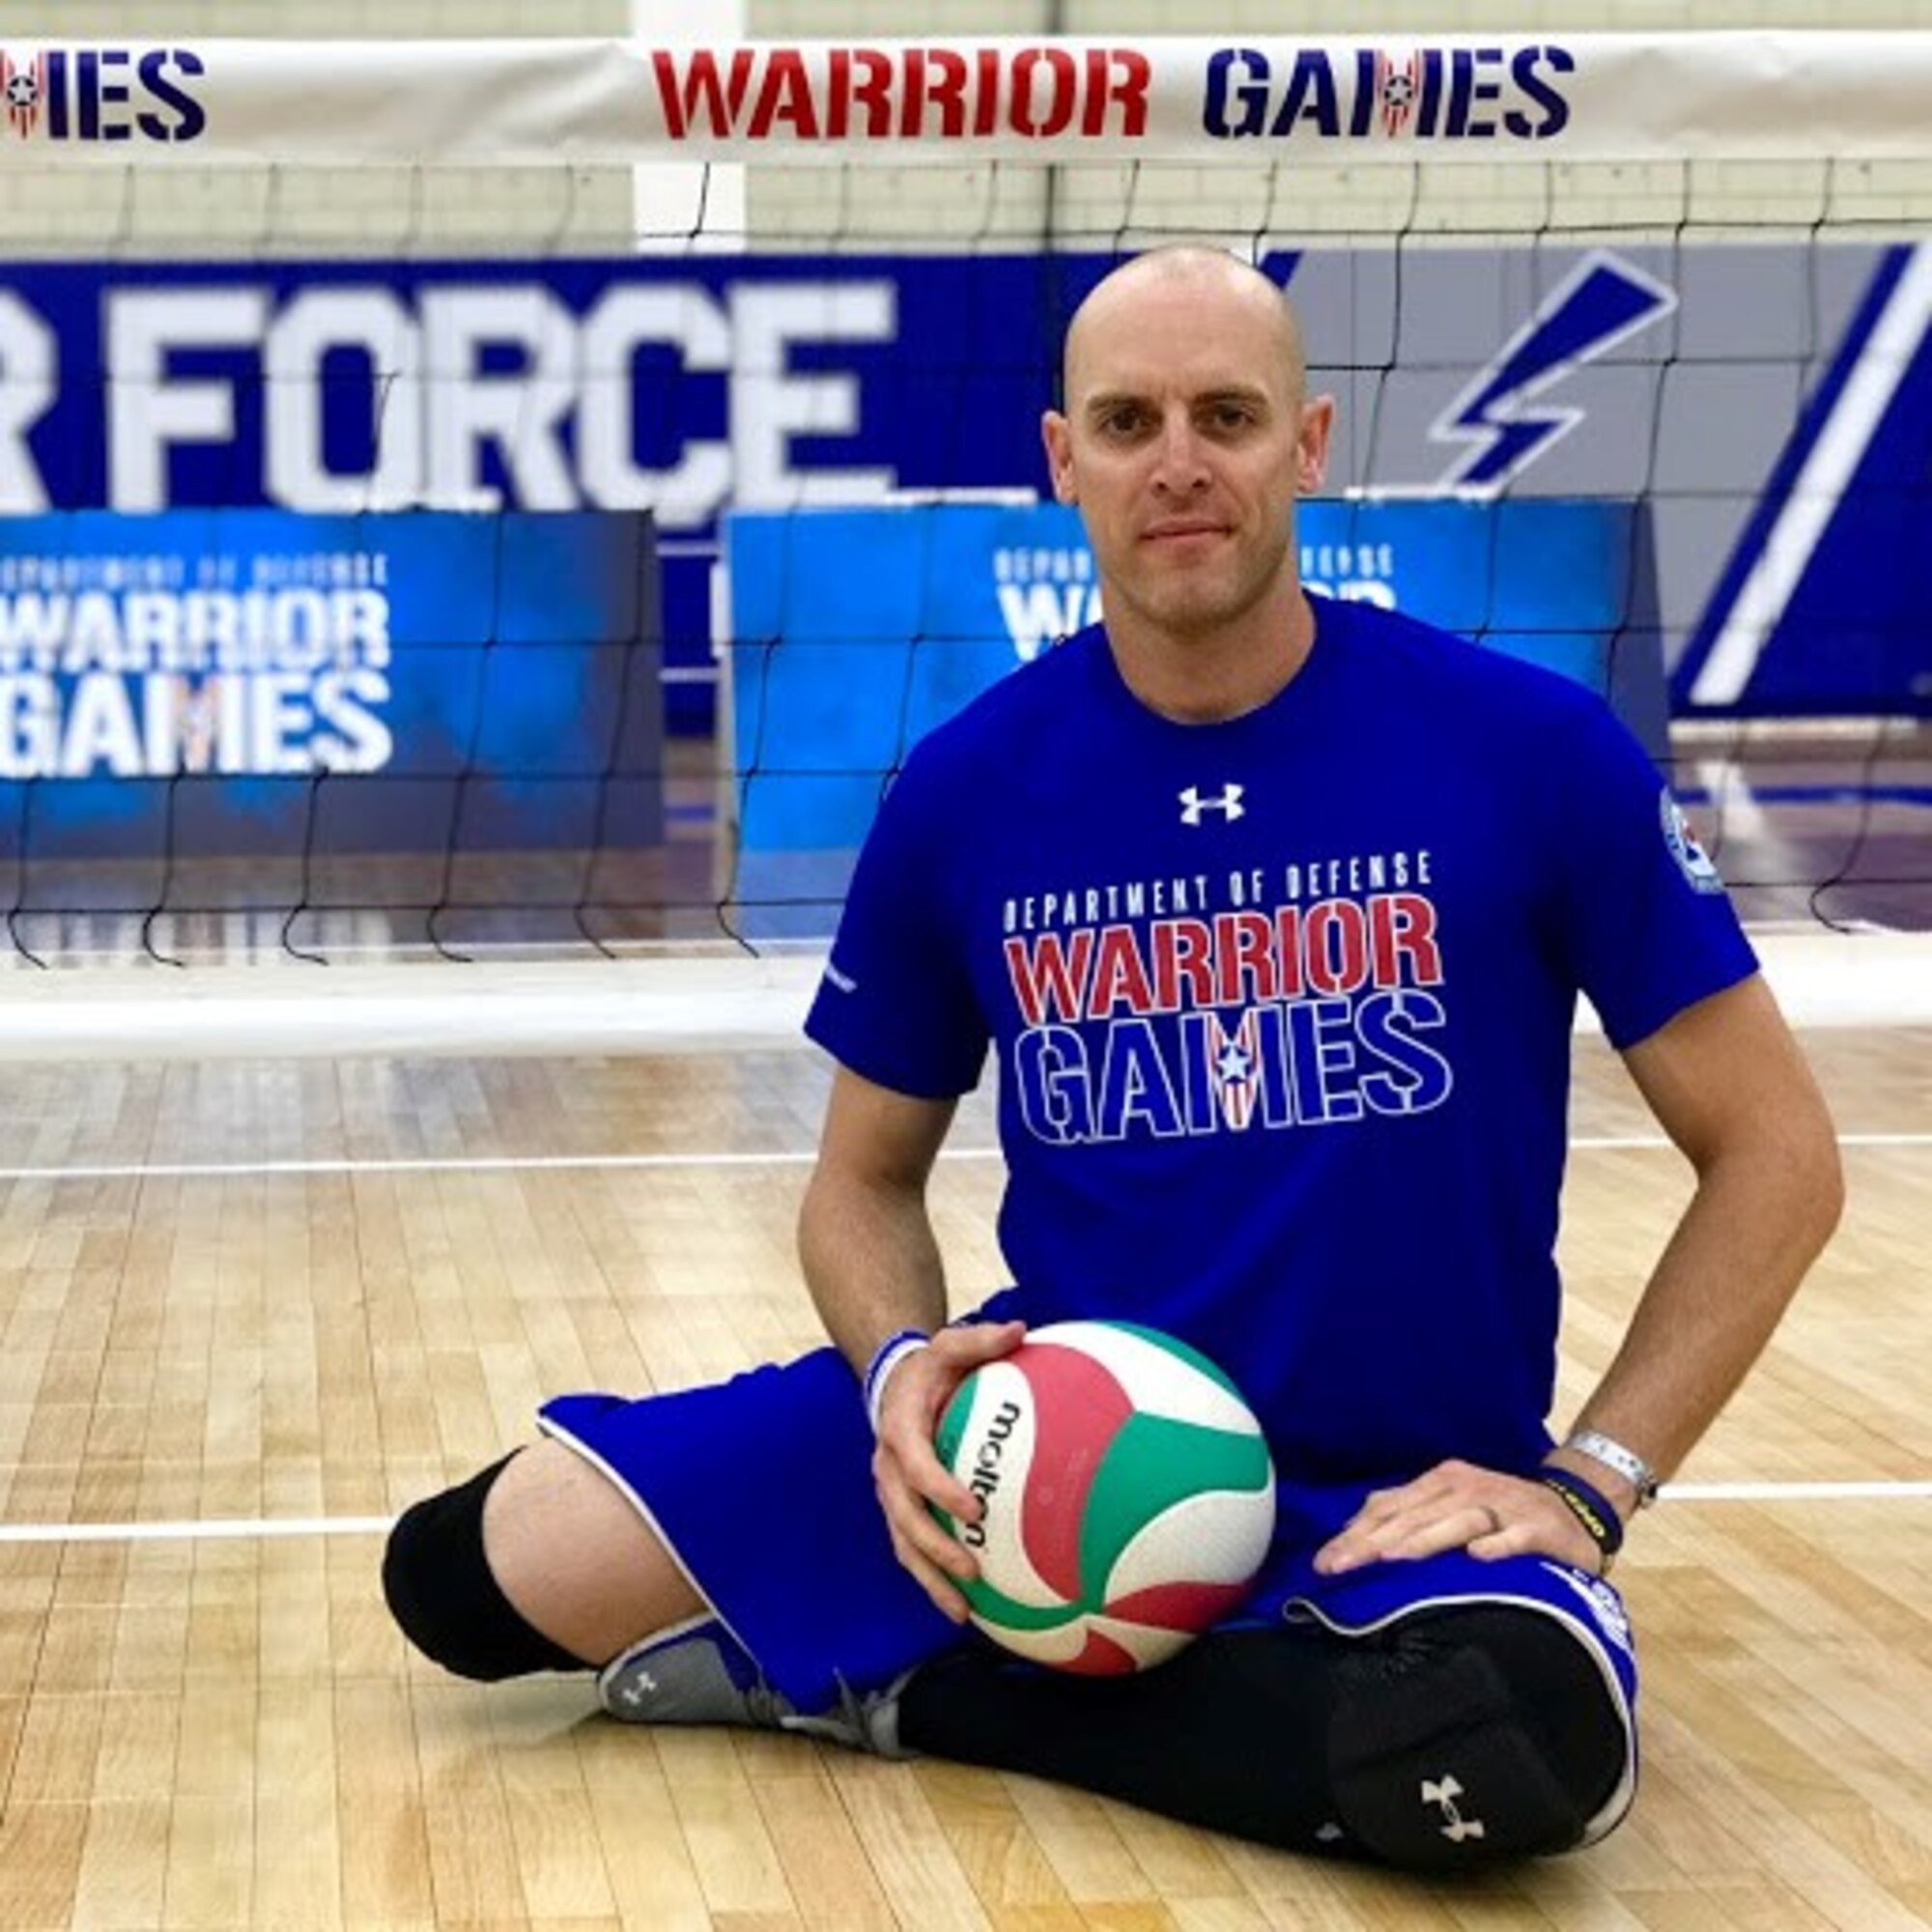 AFOSI Special Agent Bill Lickman, Detachment 223, Tyndall, Air Force Base, Fla., pauses during a break in the sitting volleyball competition at the Department of Defense Warrior Games held at the United States Air Force Academy, Colo., in June 2018. (Photo by AFW2)